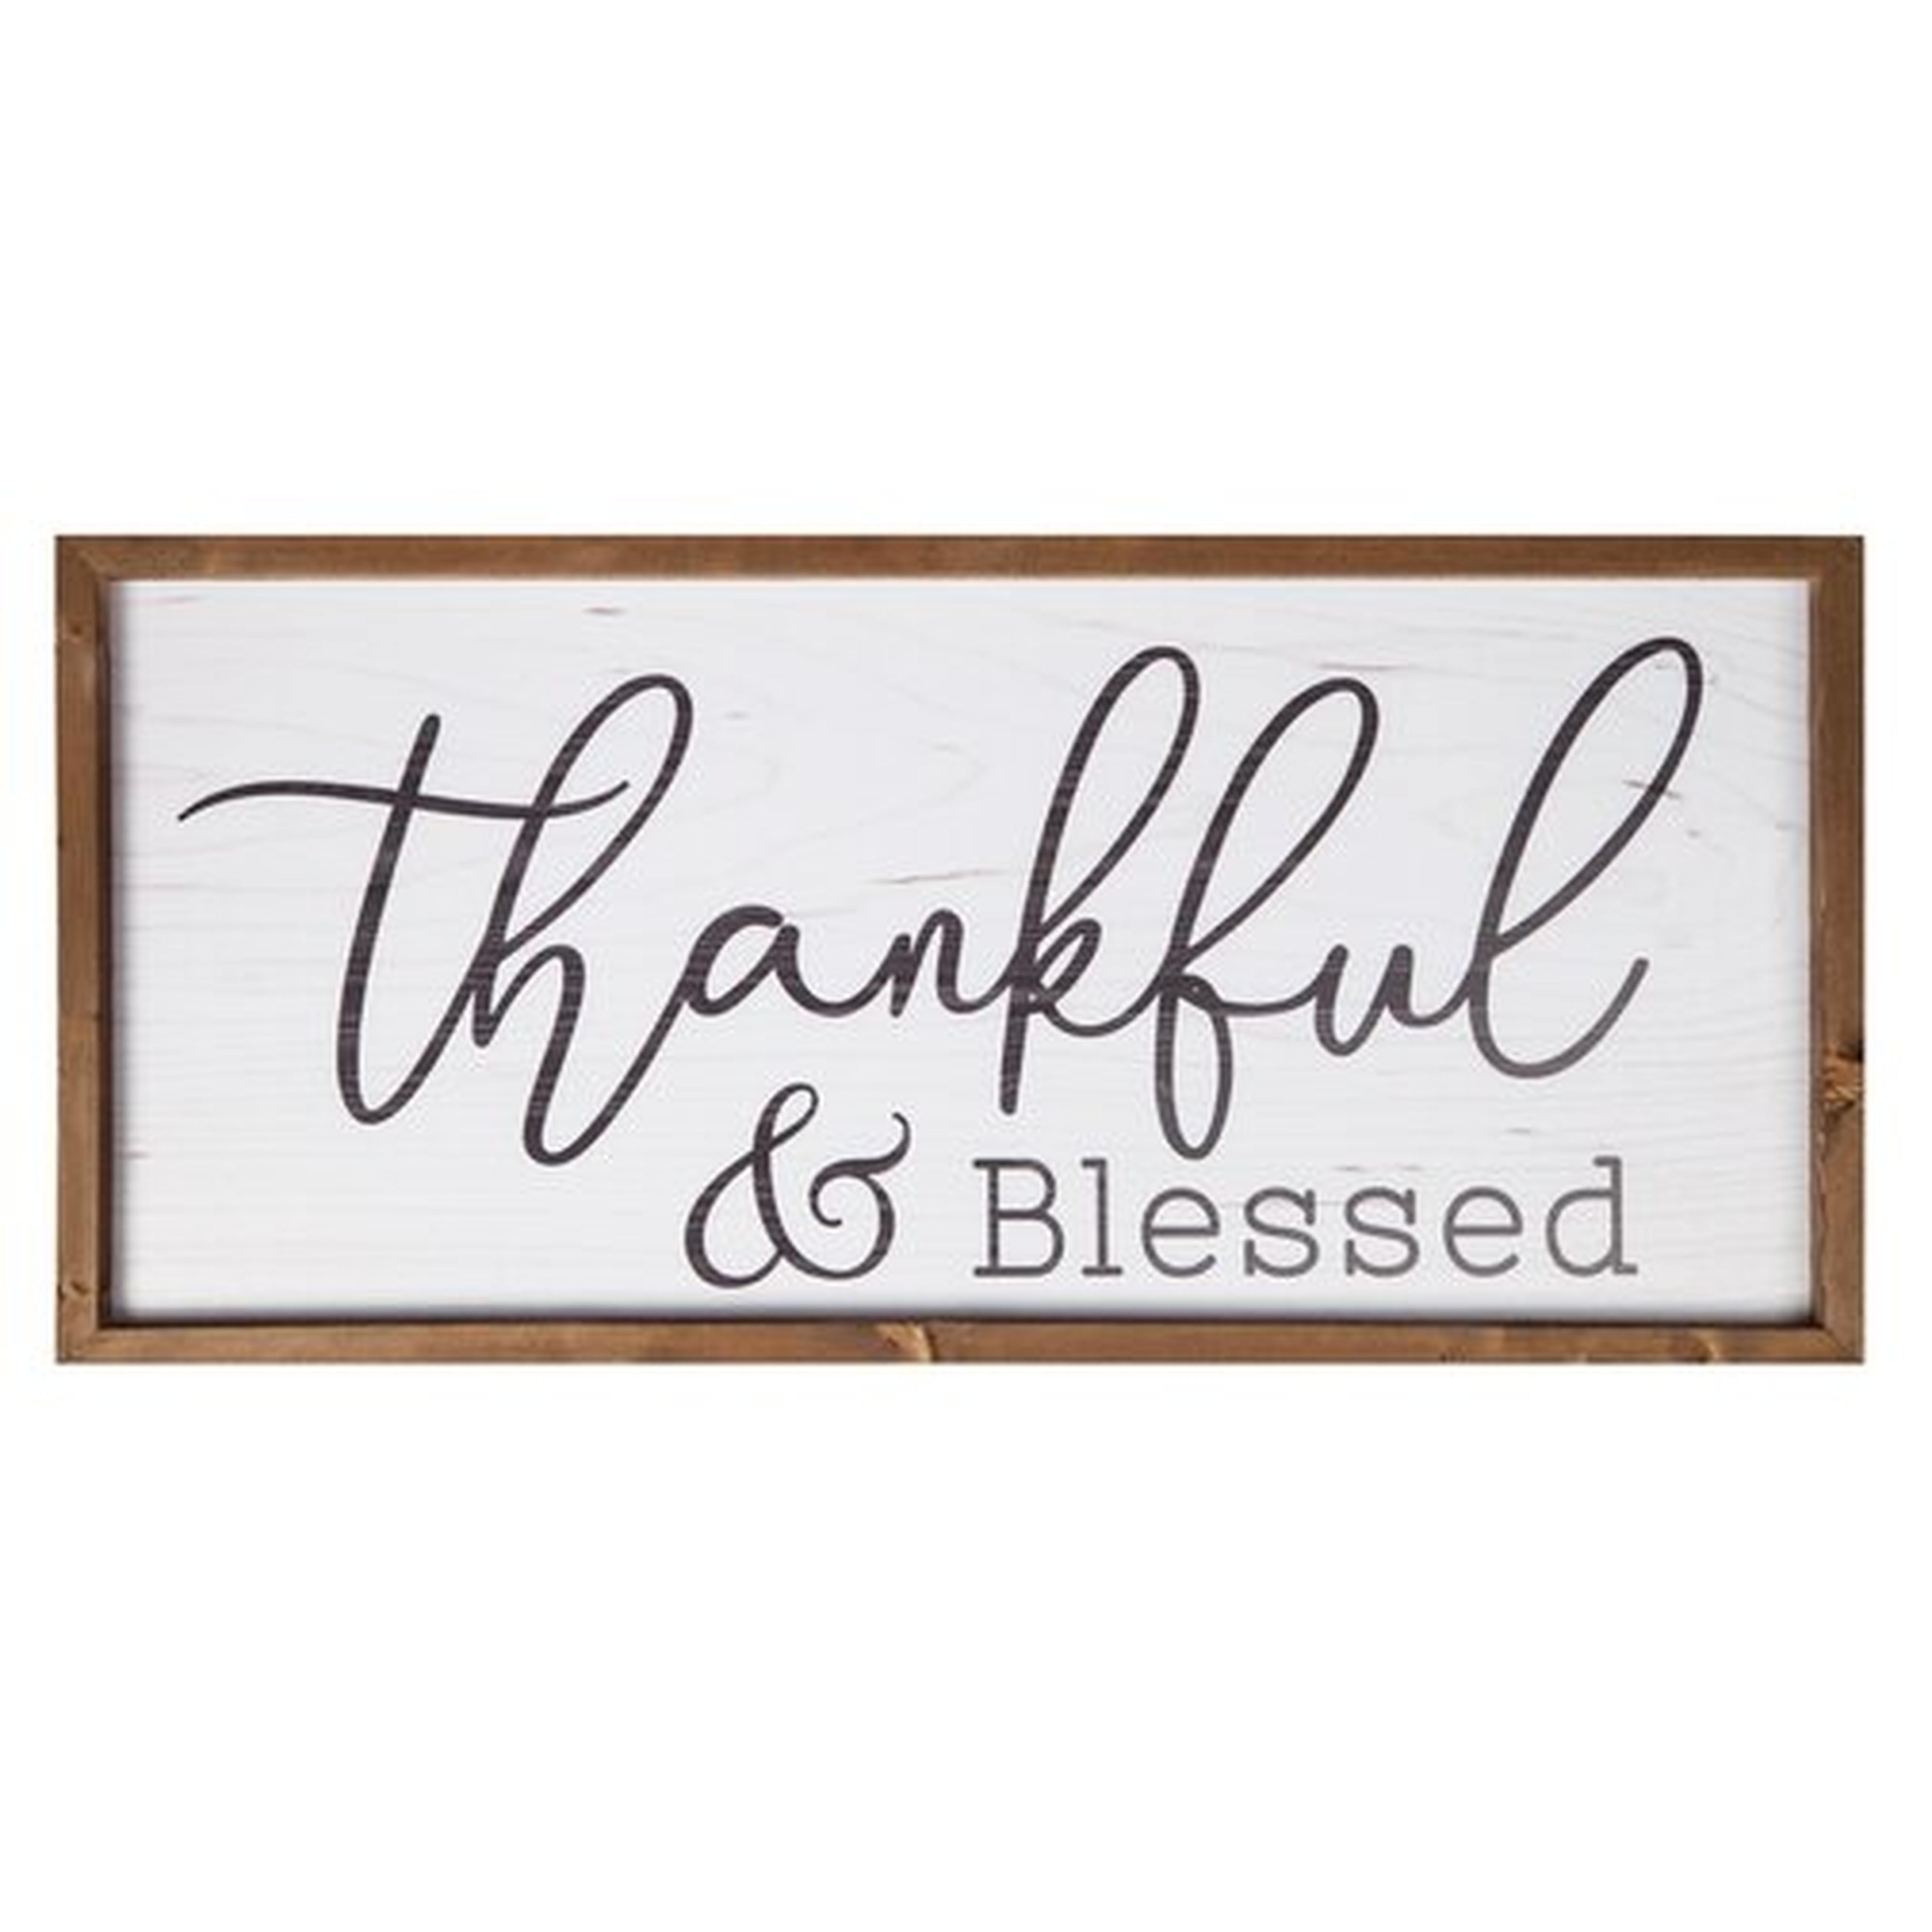 Thankful and Blessed Frame Wall Décor - Birch Lane